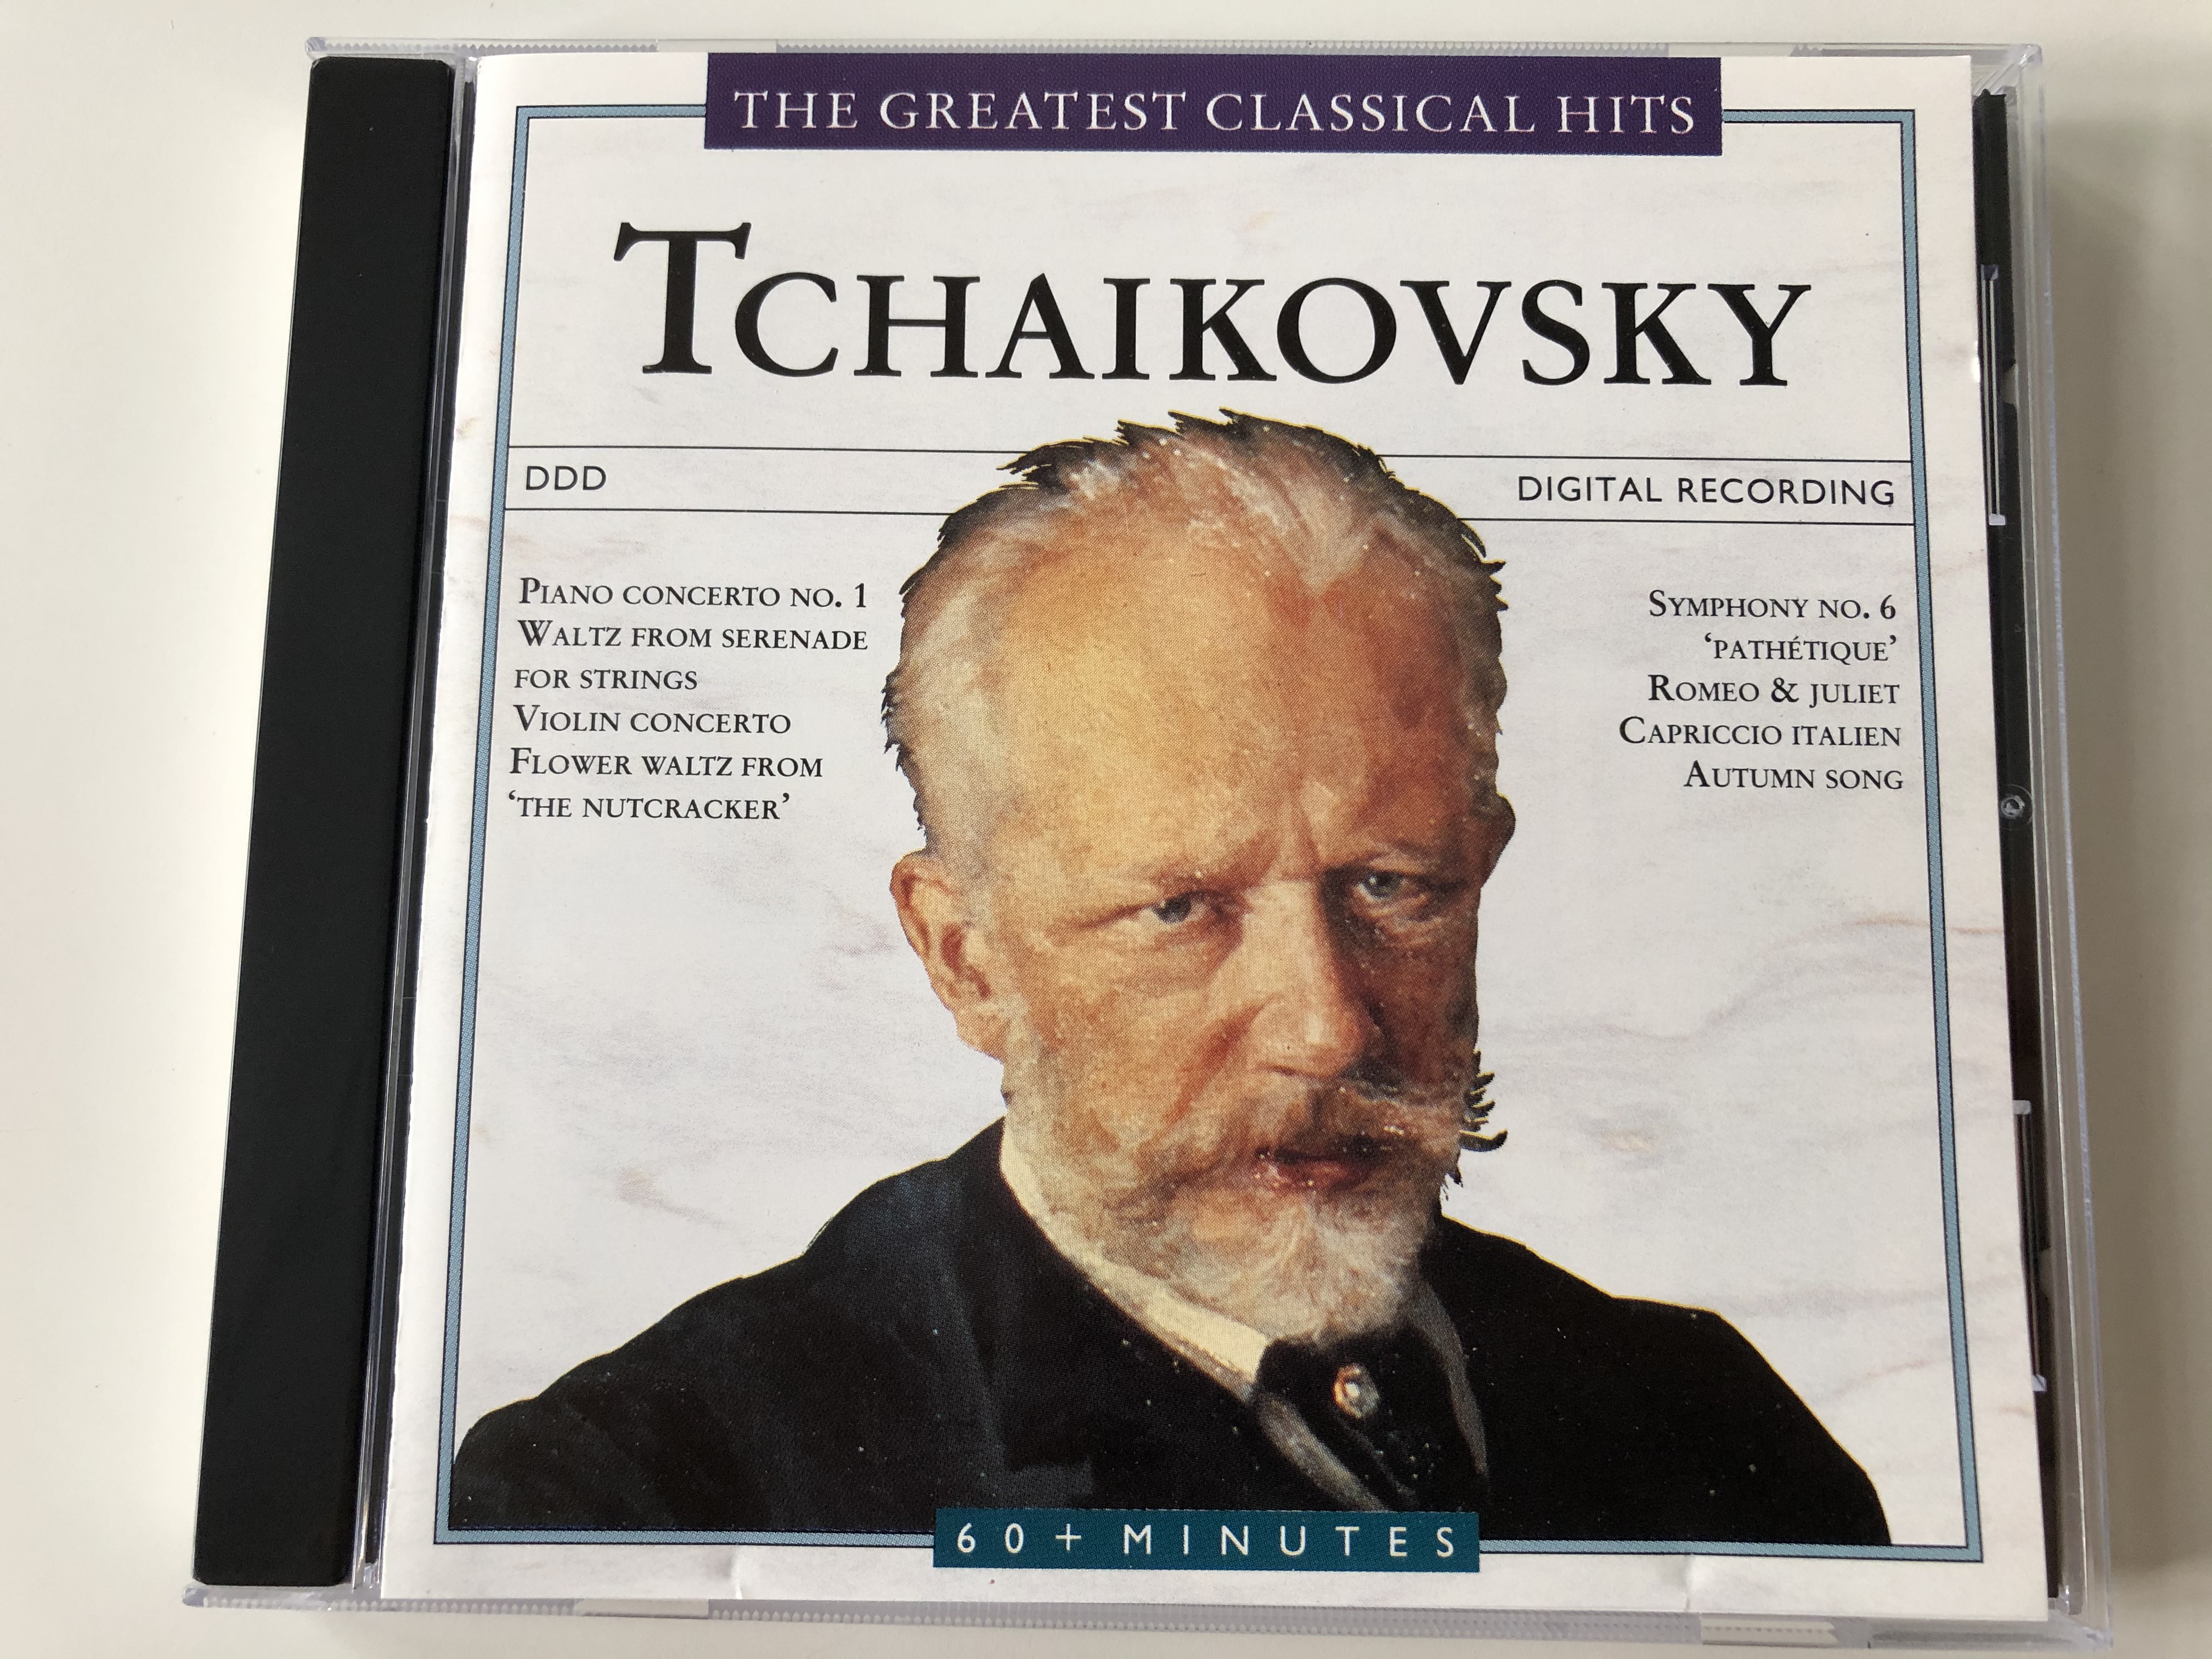 the-greatest-classical-hits-tchaikovsky-piano-concerto-no.-1-waltz-from-serenade-for-strings-violin-concerto-flower-waltz-from-the-nutcracker-symphony-no.-6-pathetique-romeo-juliet-1-.jpg